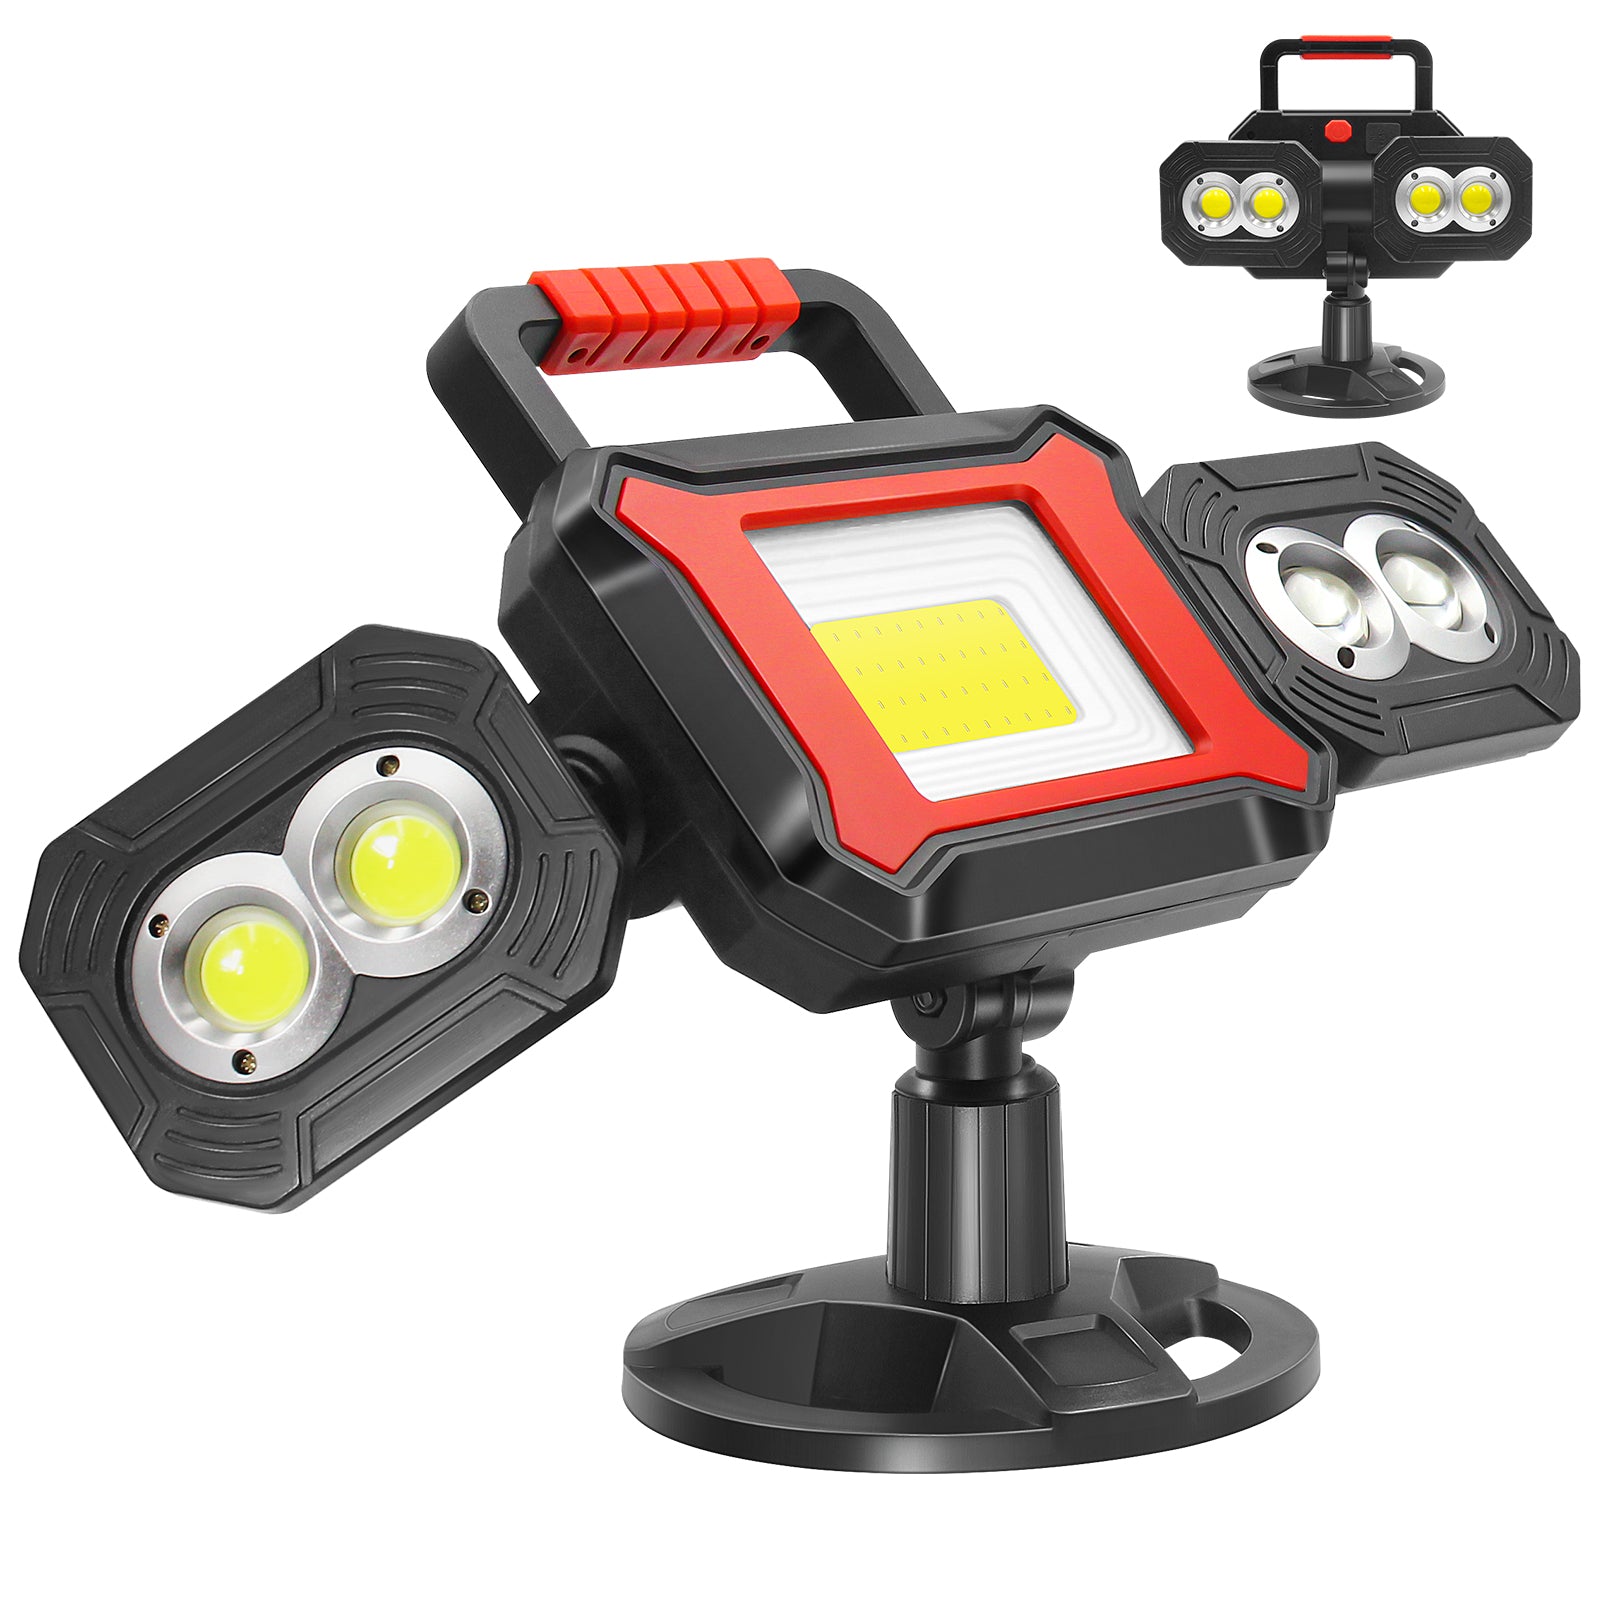 30W LED Work Light with Rechargeable Battery